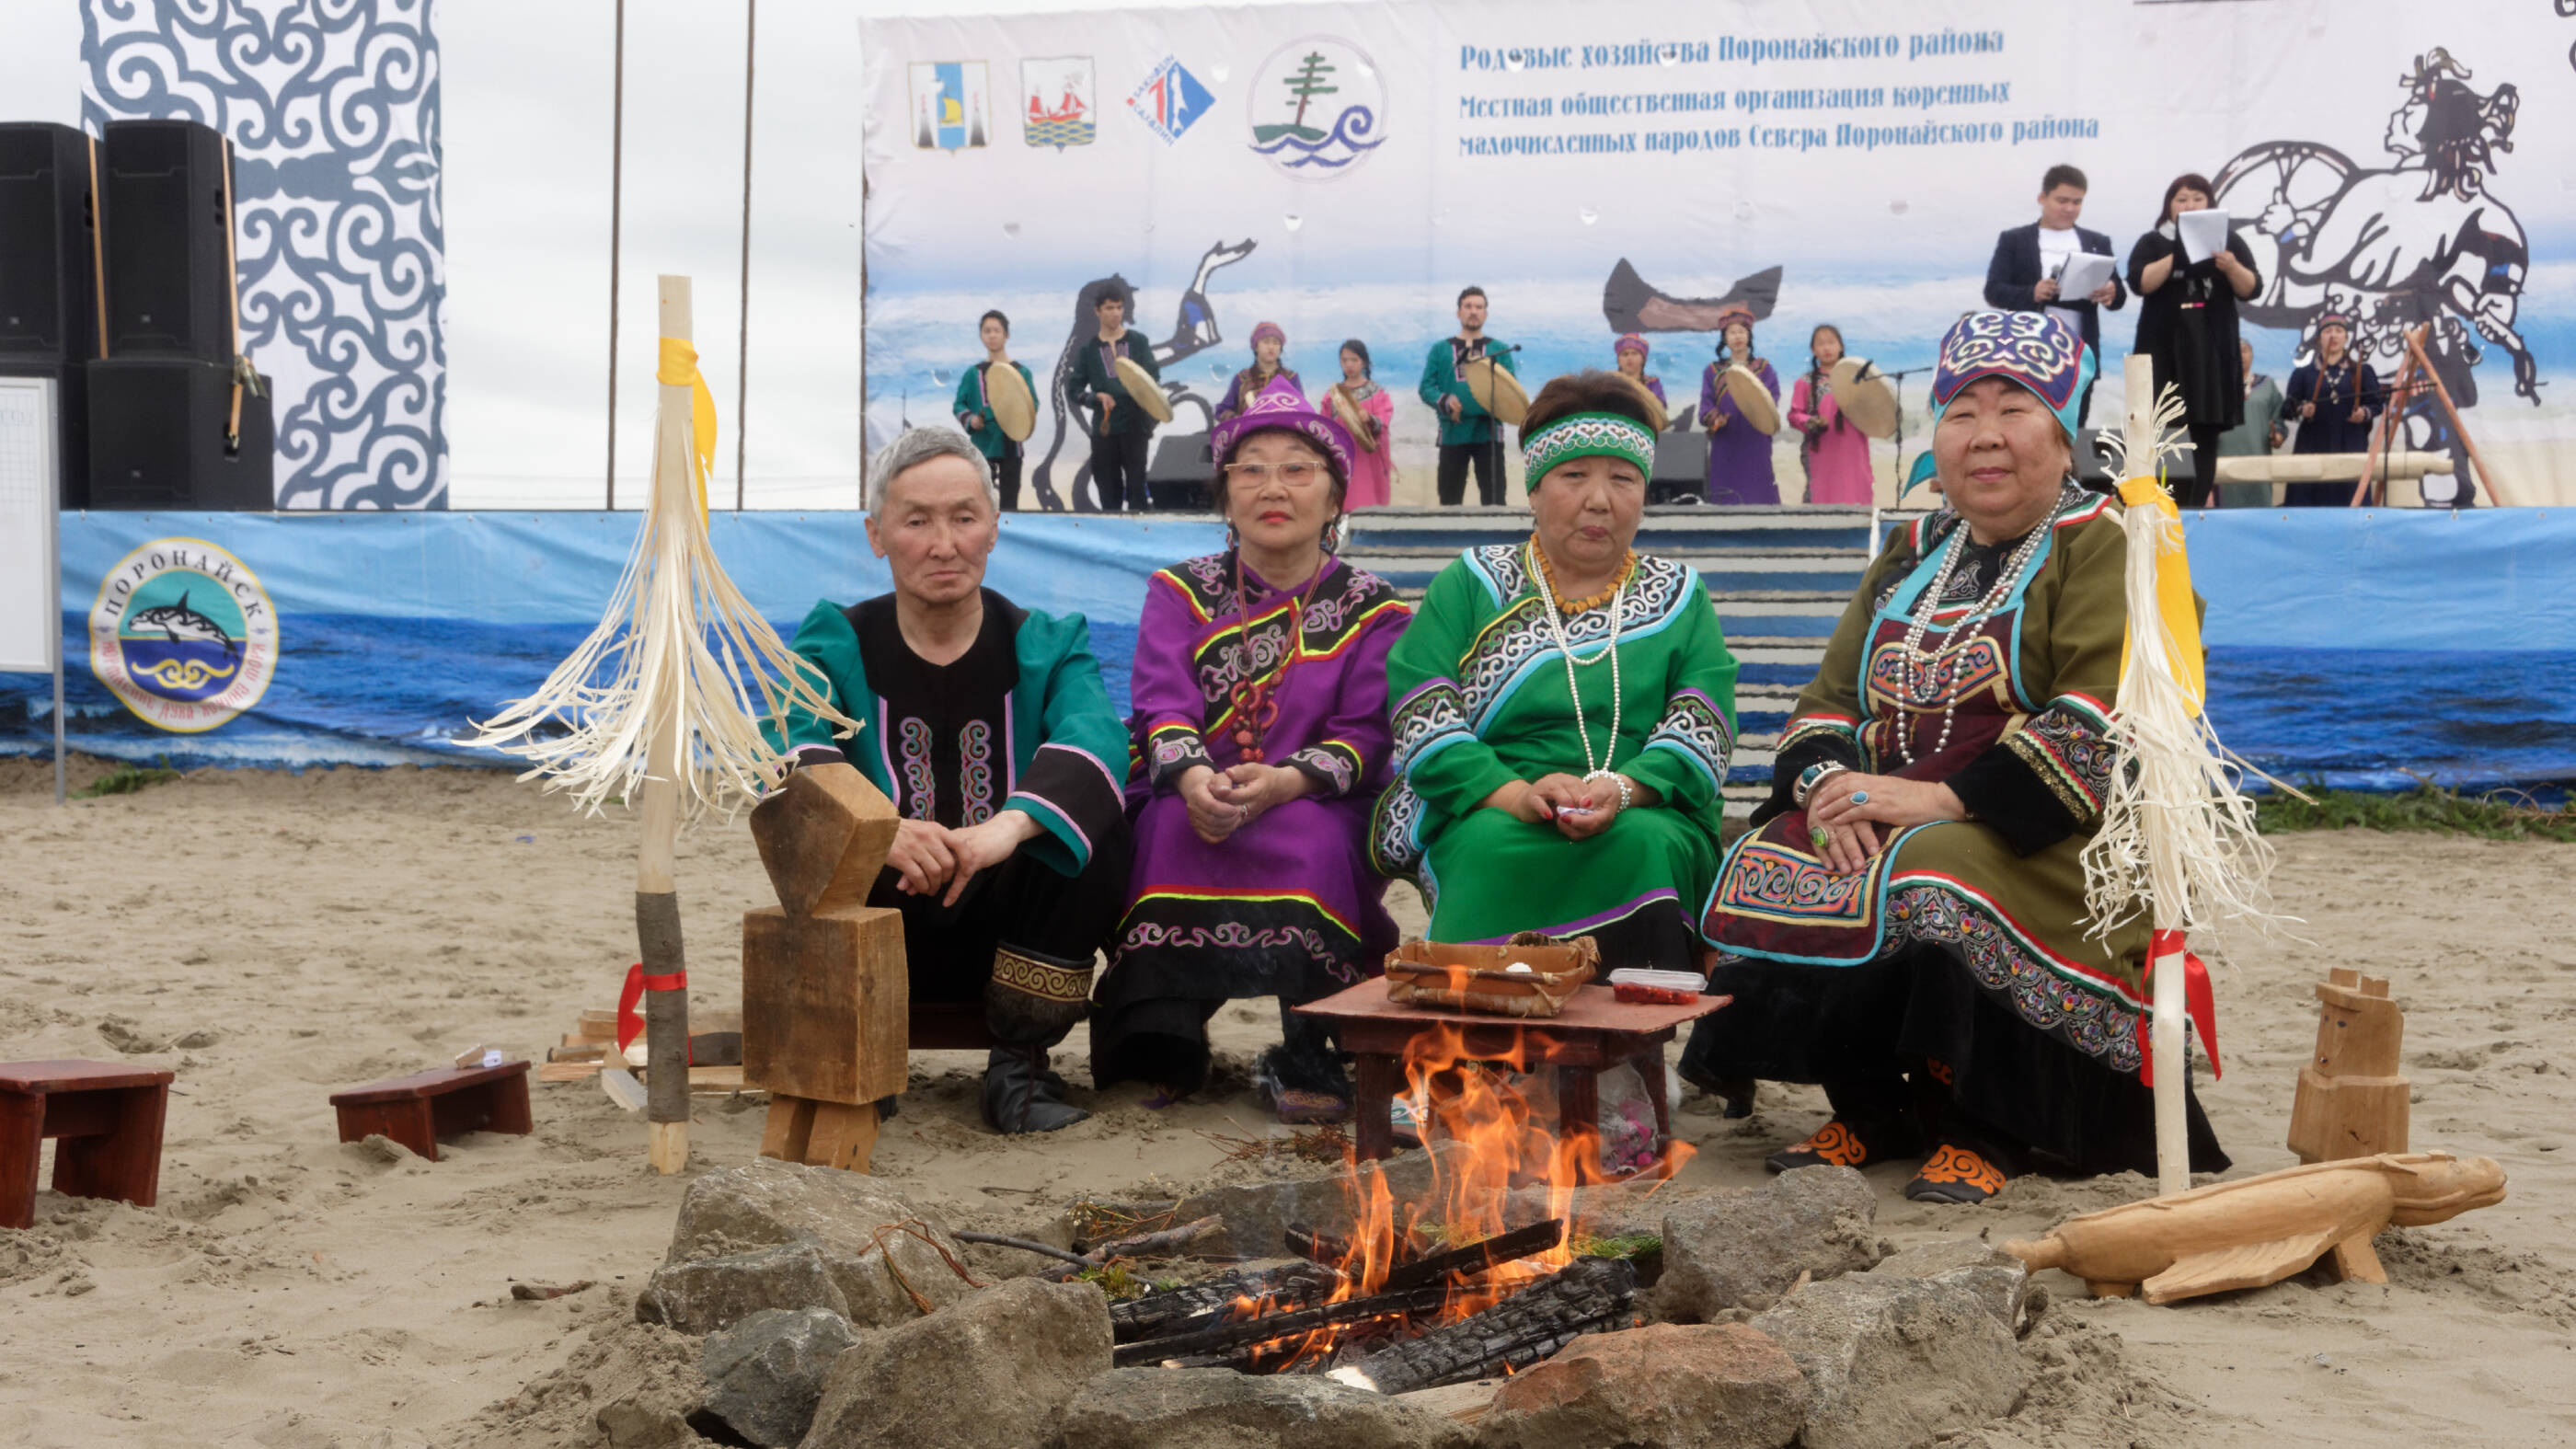 Image ExxonMobil extends open dialogue and respect to the culture and traditions of indigenous minority peoples of the north (IMPN), residing in their traditional habitats close to our operations on Sakhalin Island.